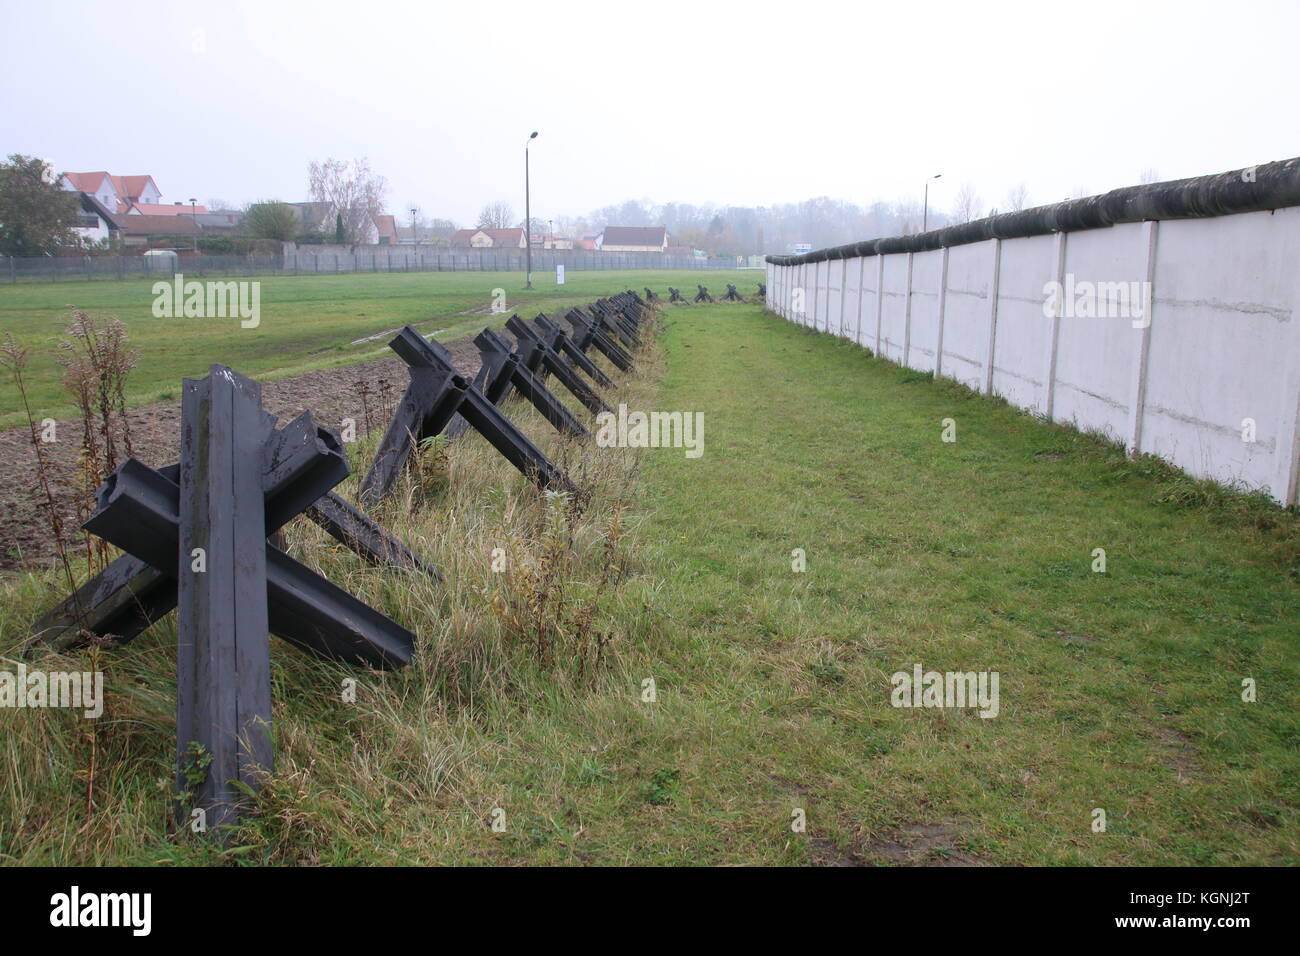 Hötensleben, Germany. 9th Nov, 2017. The Border Memorial Hötensleben. It show characteristic barrier system erected by the GDR border regime. In Germany the wall fell 28 years ago, on 9 November 1989. Credit: Mattis Kaminer/Alamy Live News Stock Photo